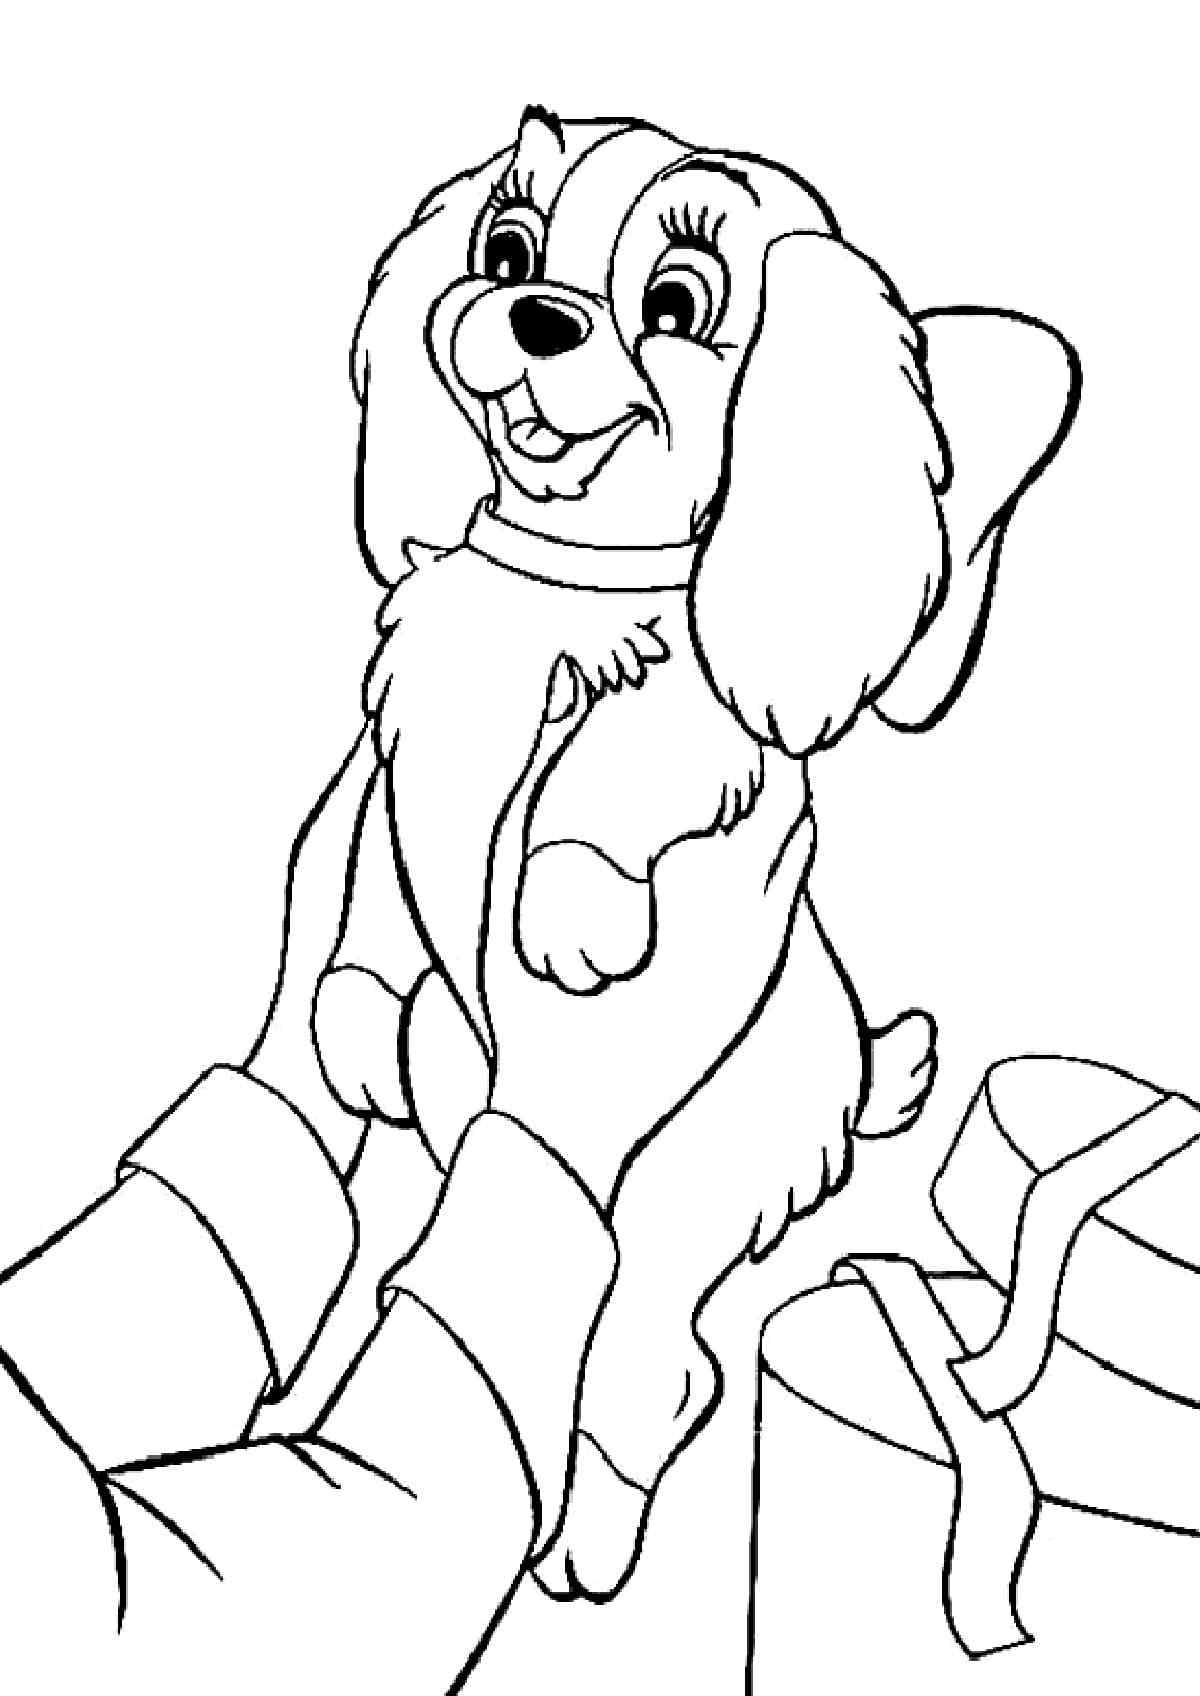 I Am Your Christmas Present Coloring Page